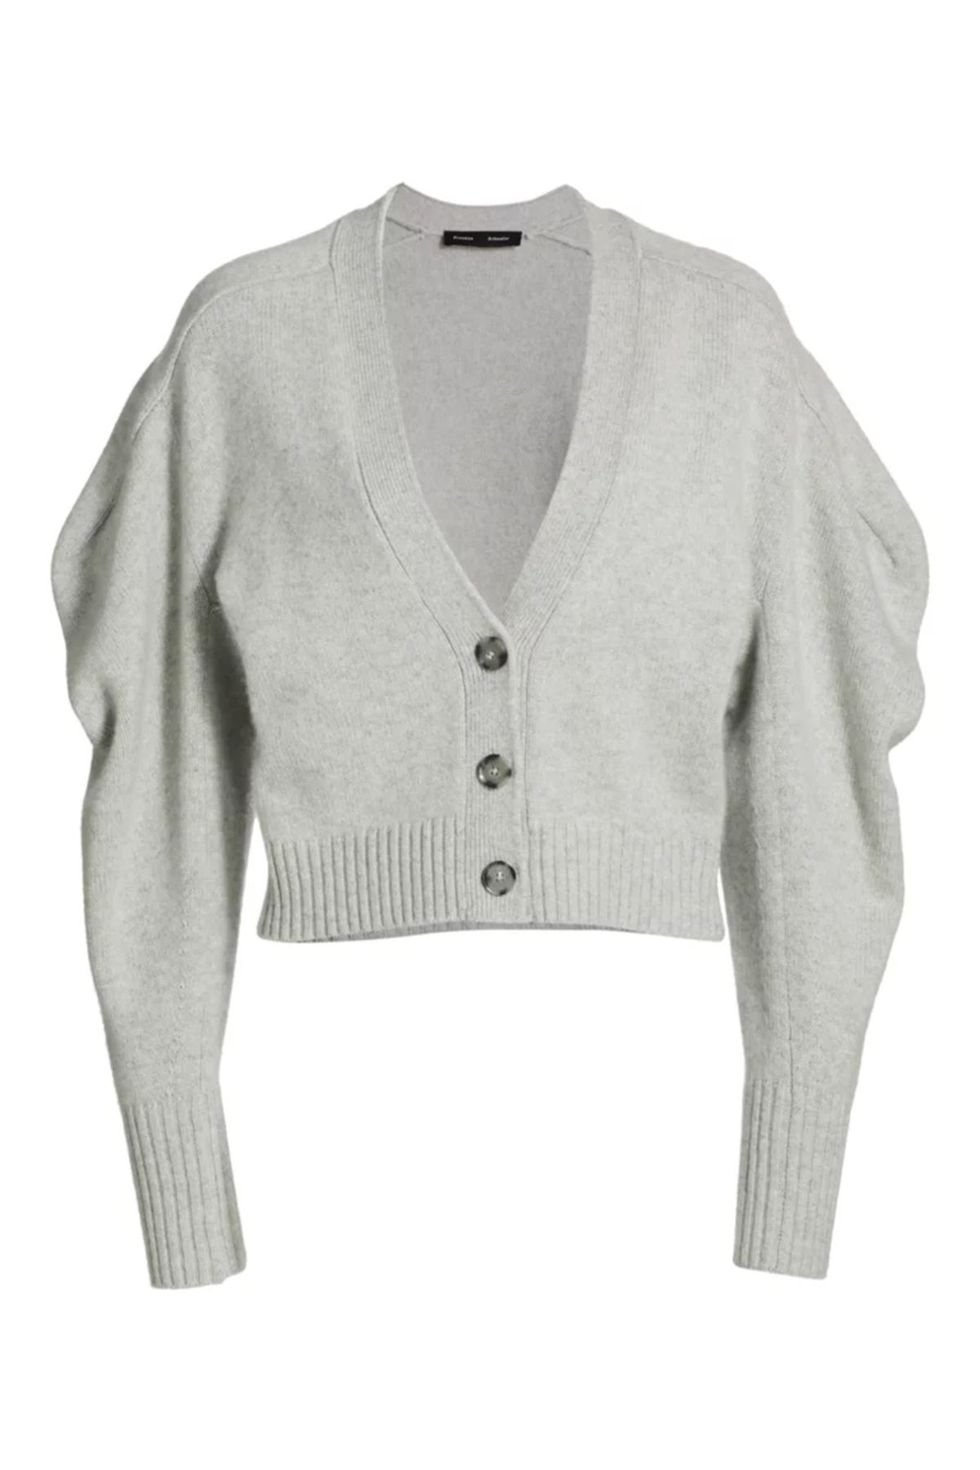 20 Best Cardigans for Women - Stylish Women's Cardigans for Fall 2021